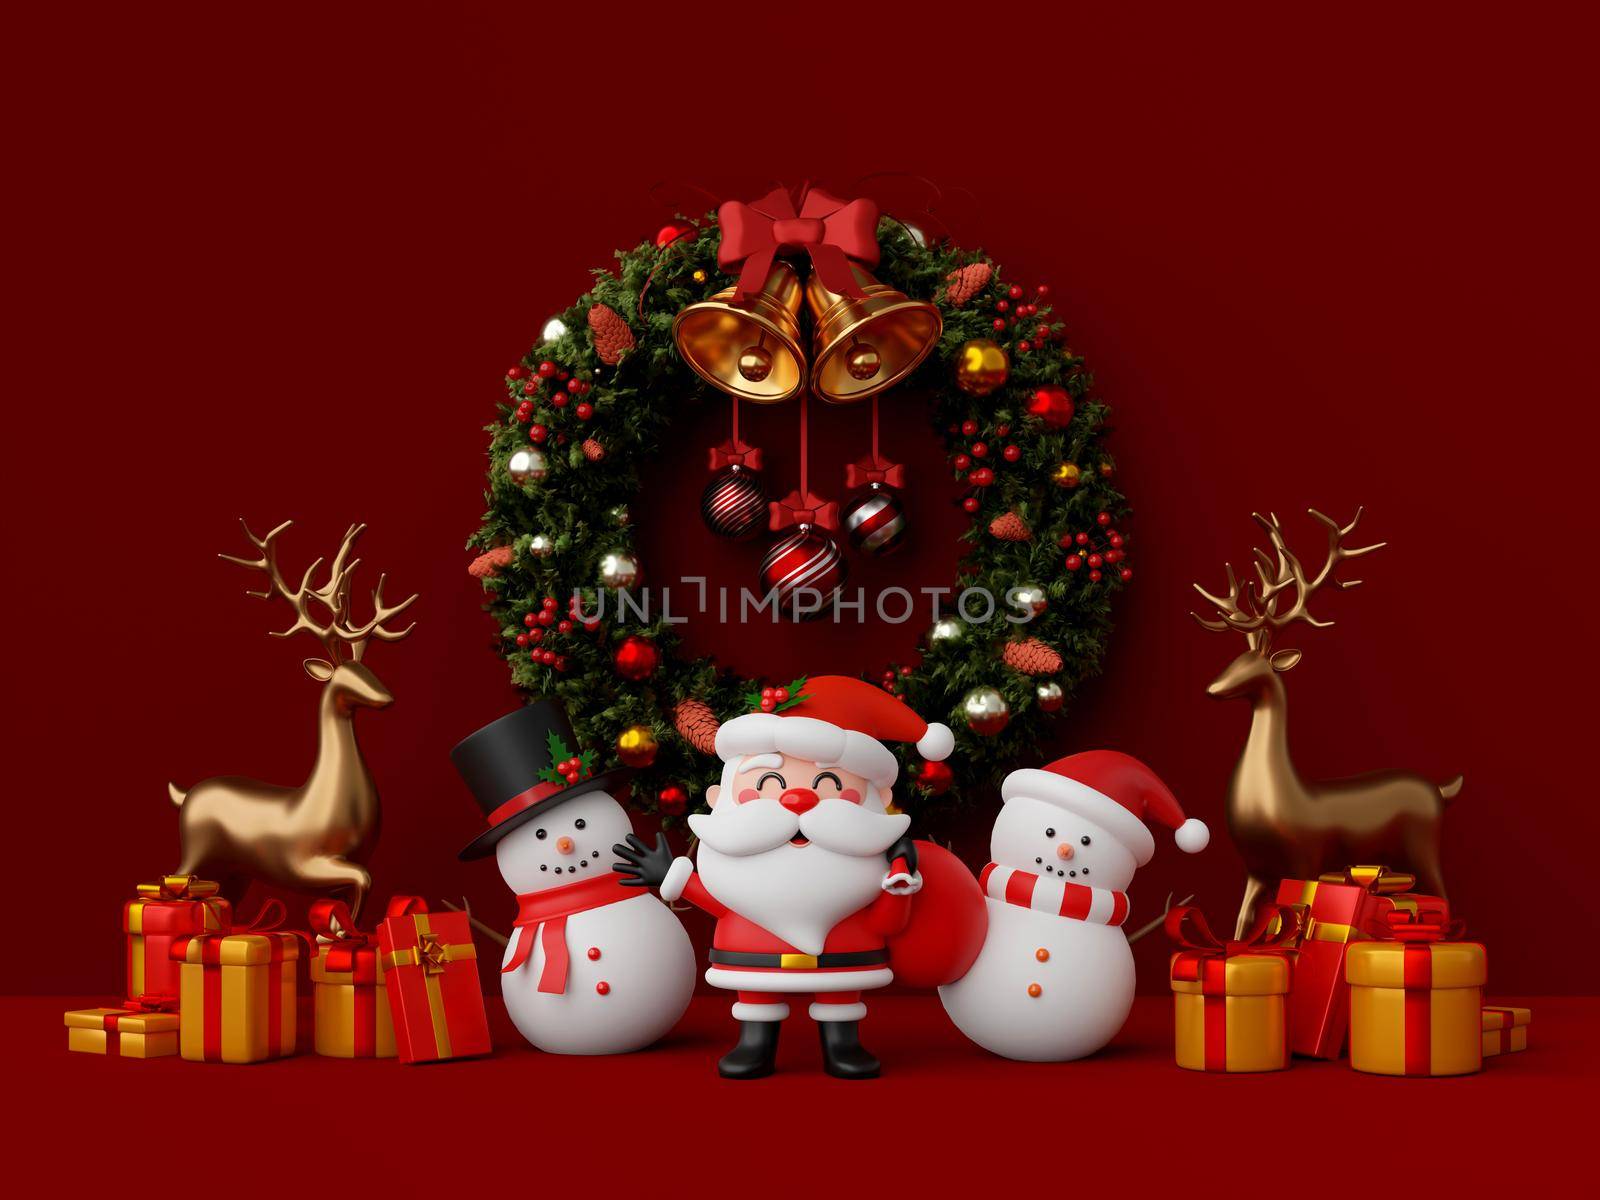 3d illustration Christmas theme, Santa Claus and snowman with Christmas wreath and decoration by nutzchotwarut